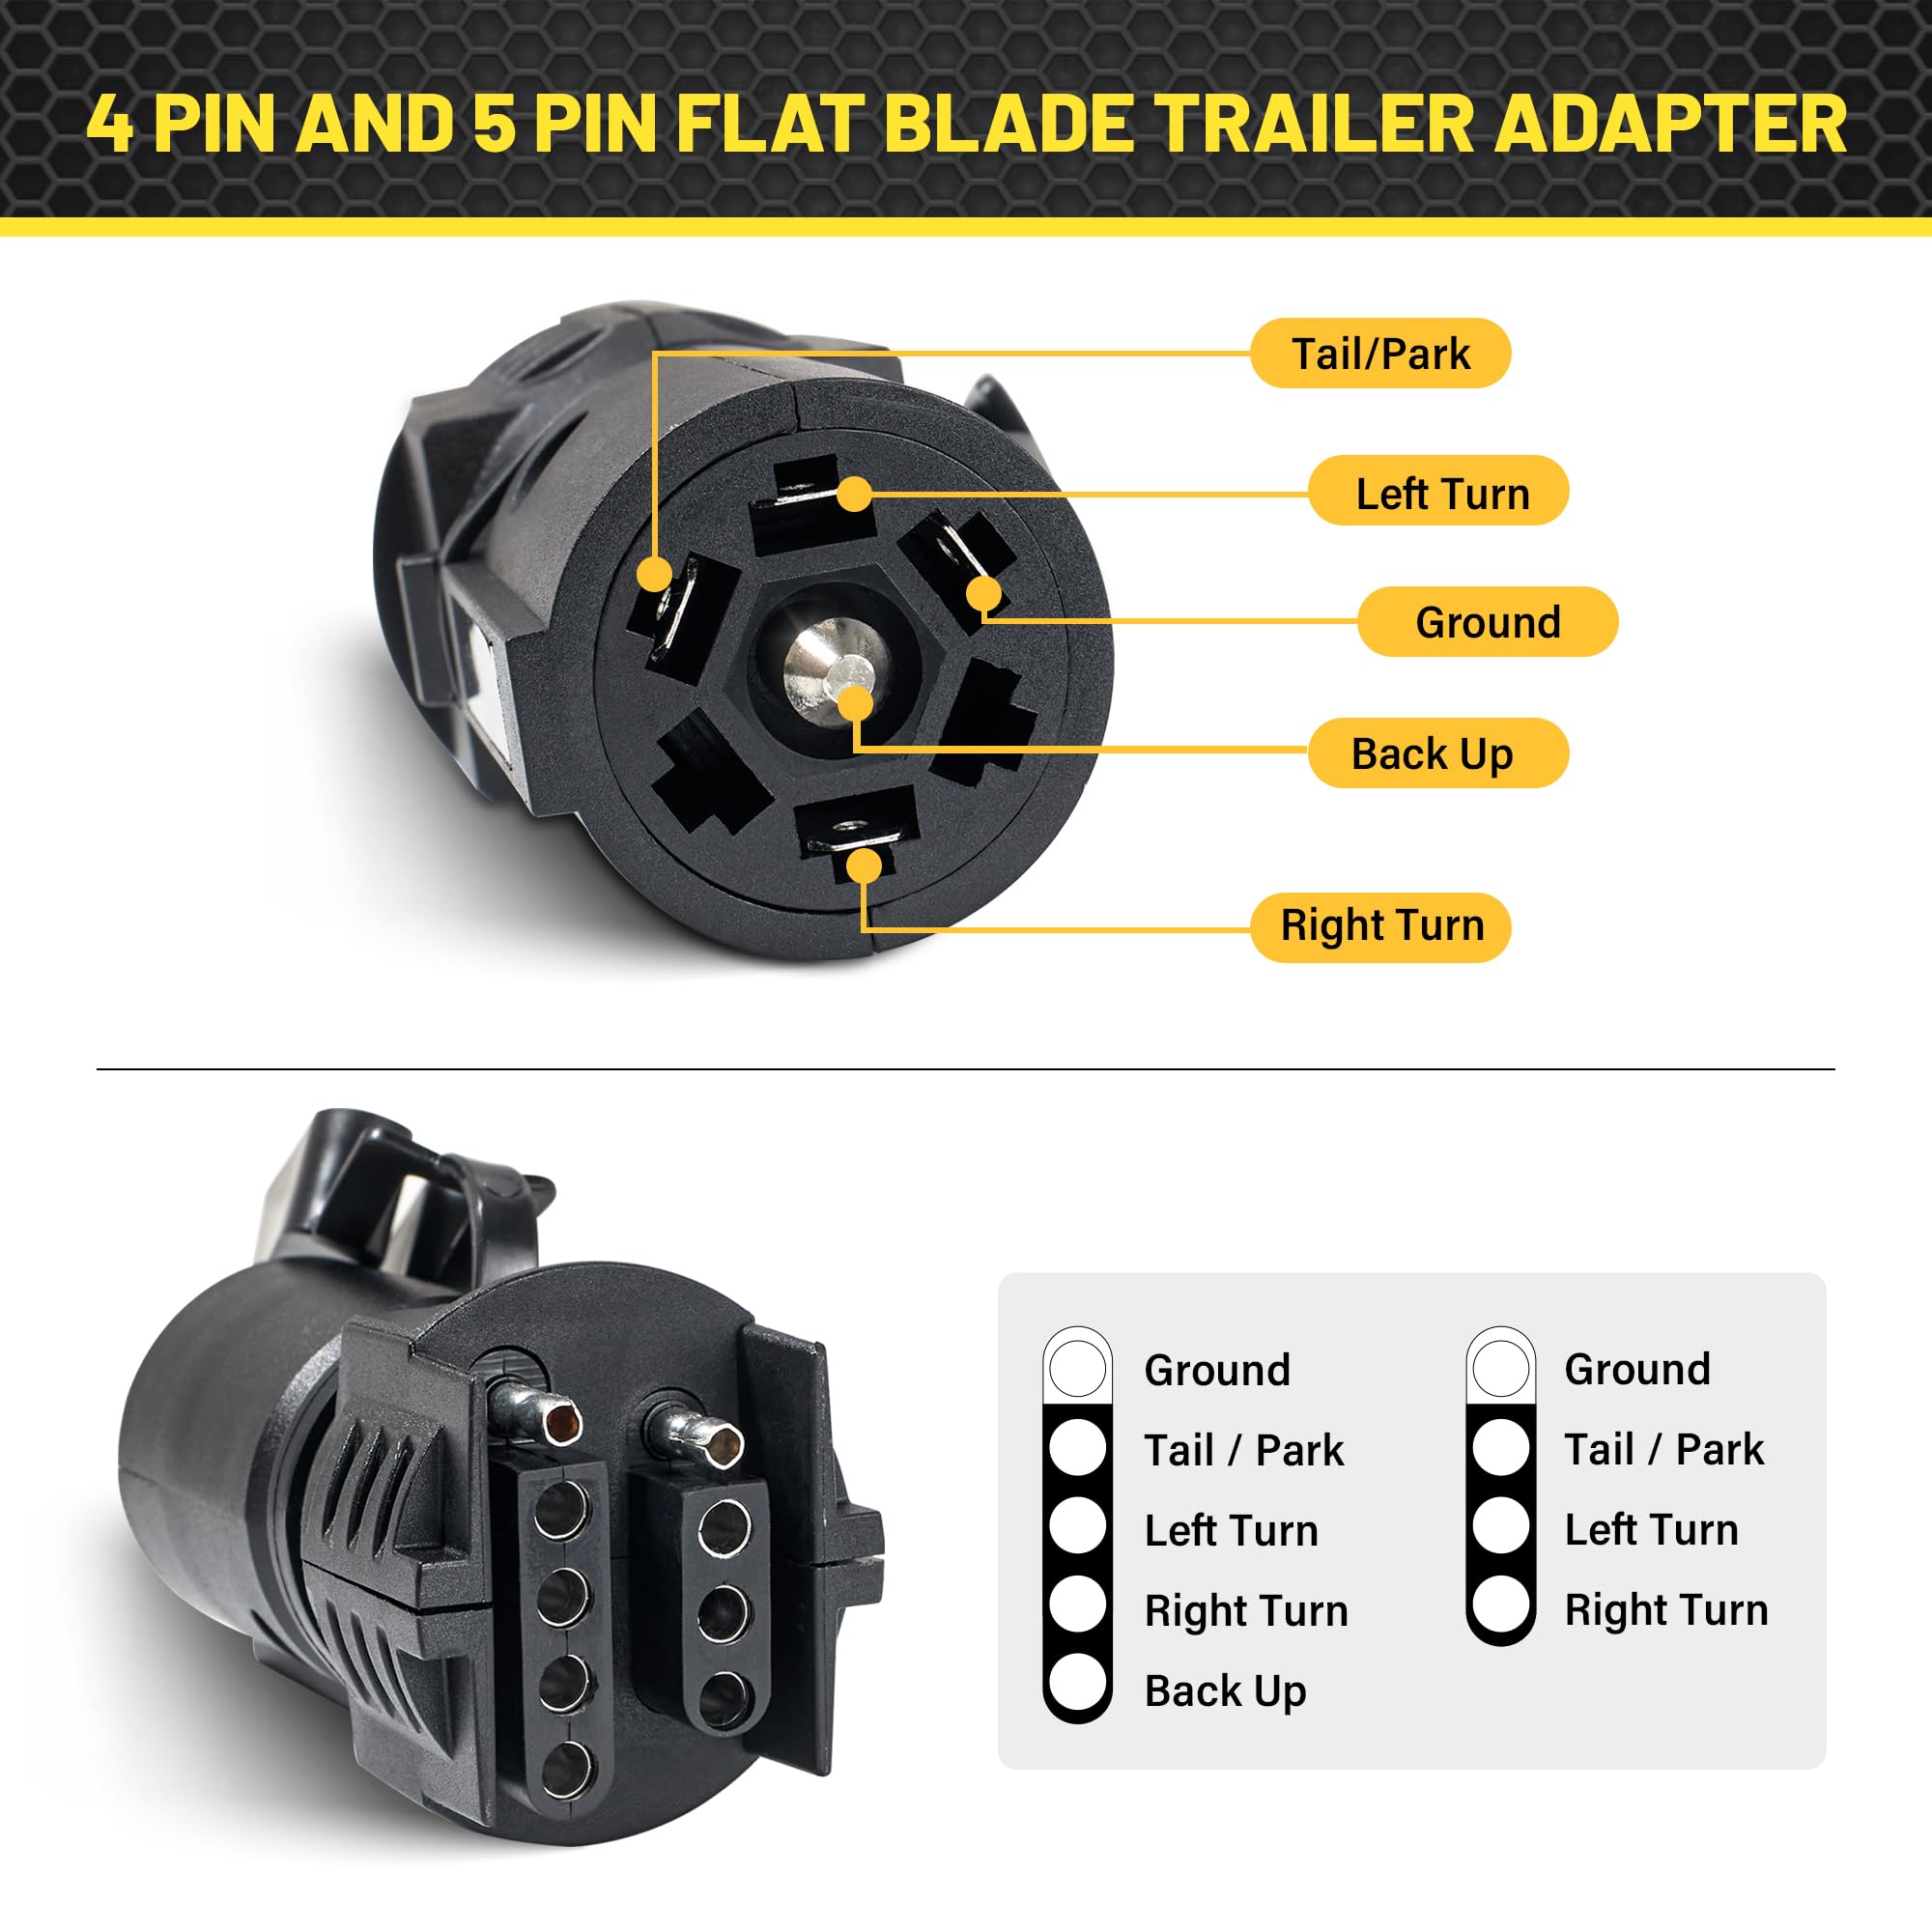 Oyviny 7 Pin Round to 4 Pin and 5 Pin Flat Blade Trailer Adapter, 7 to 5 Pin Trailer Plug Adapter 2-in-1 Design